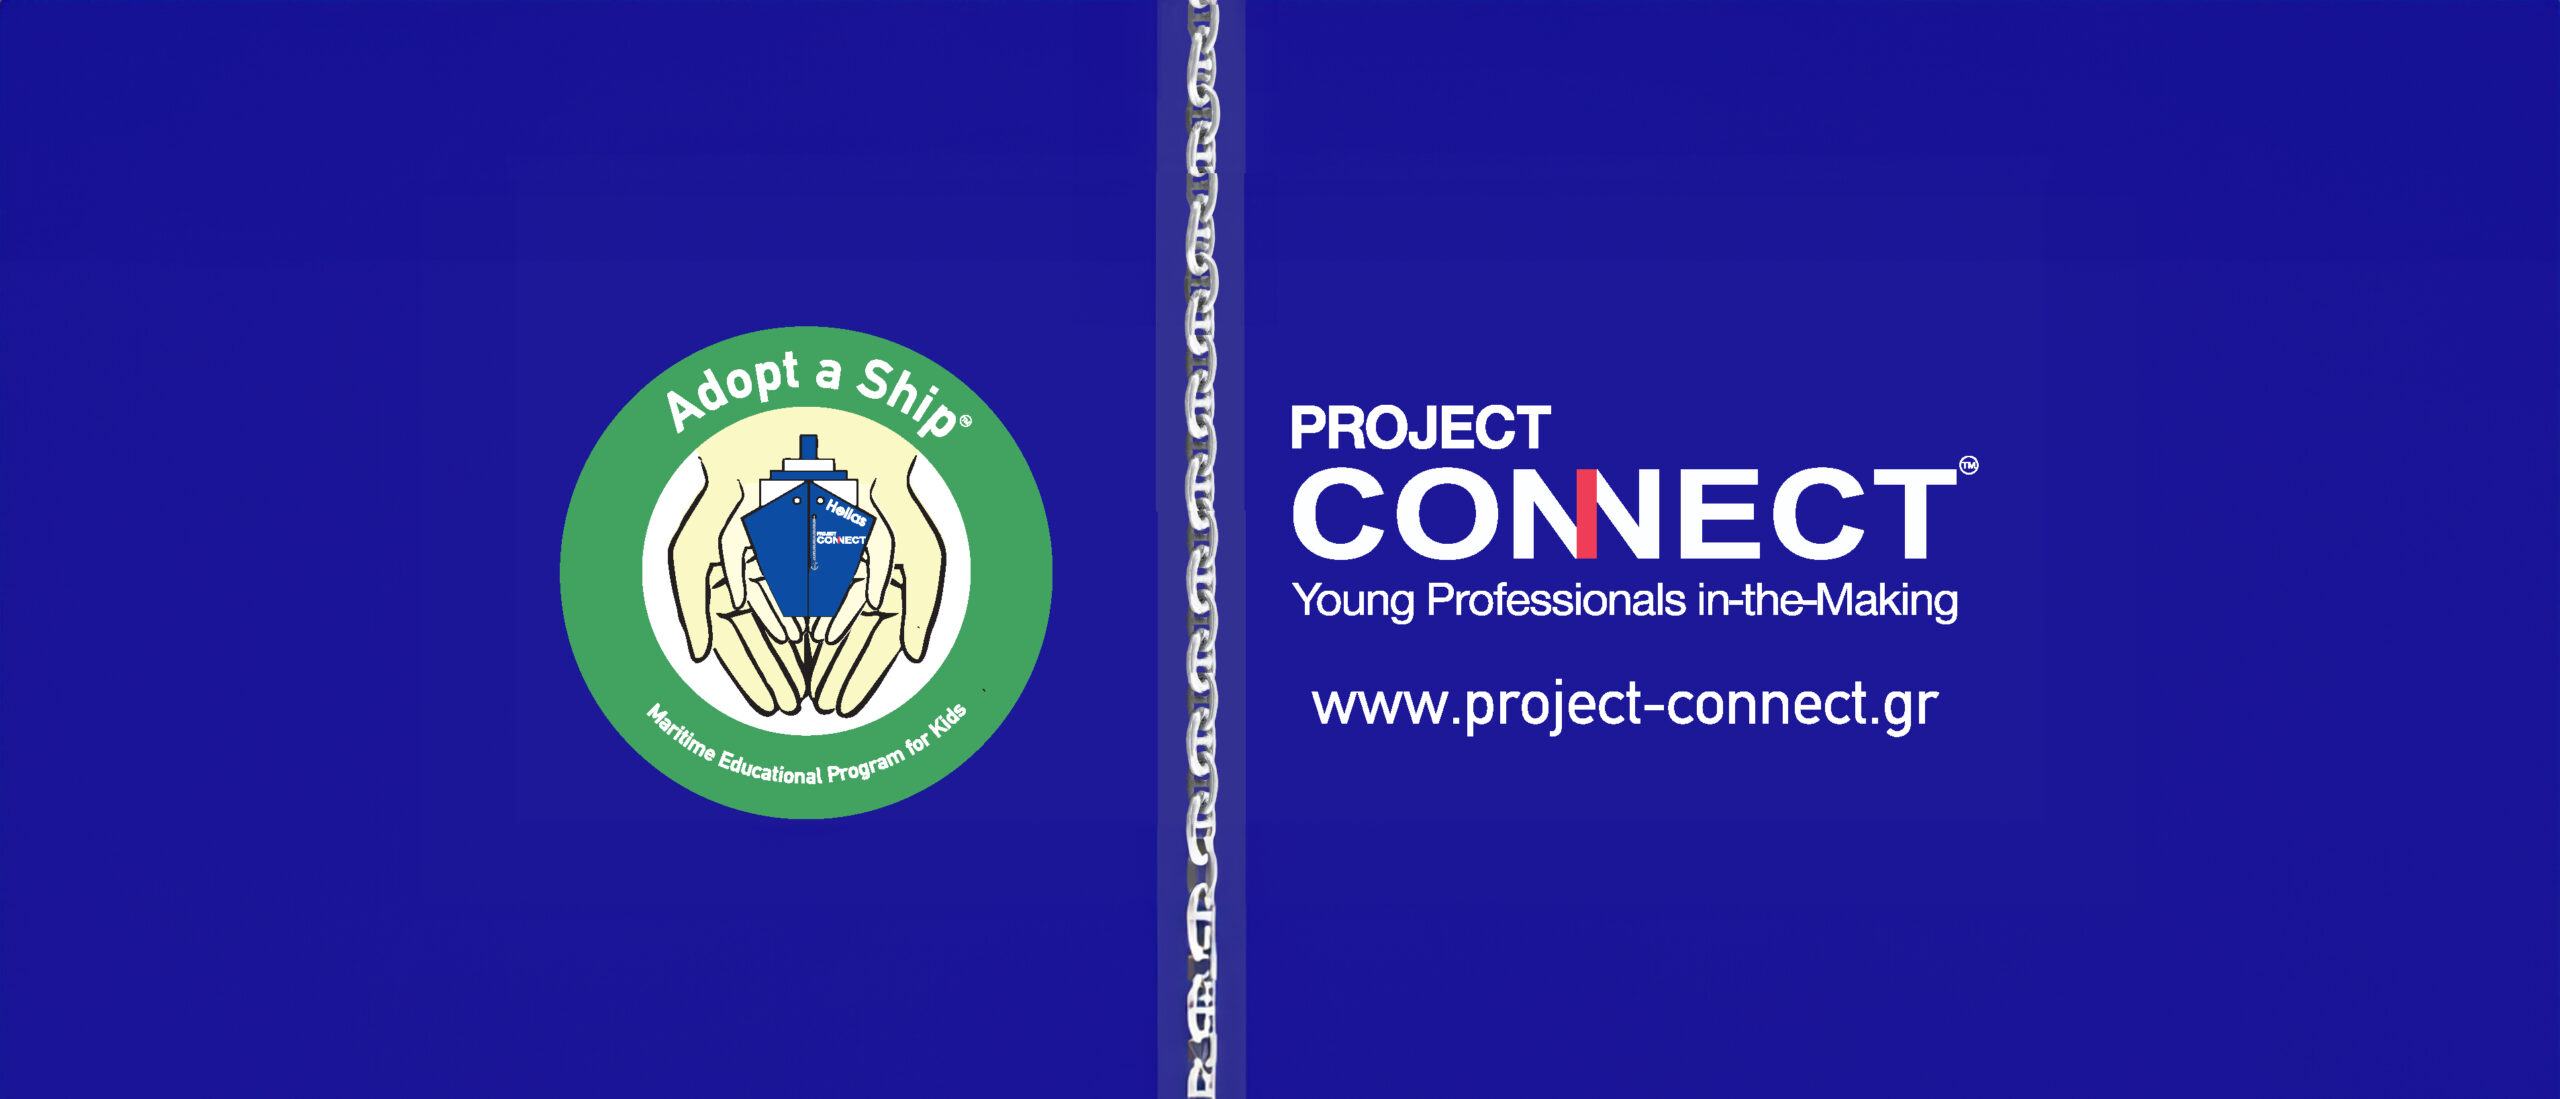 IBIA proudly supports Project Connect’s “Adopt a Ship” programme